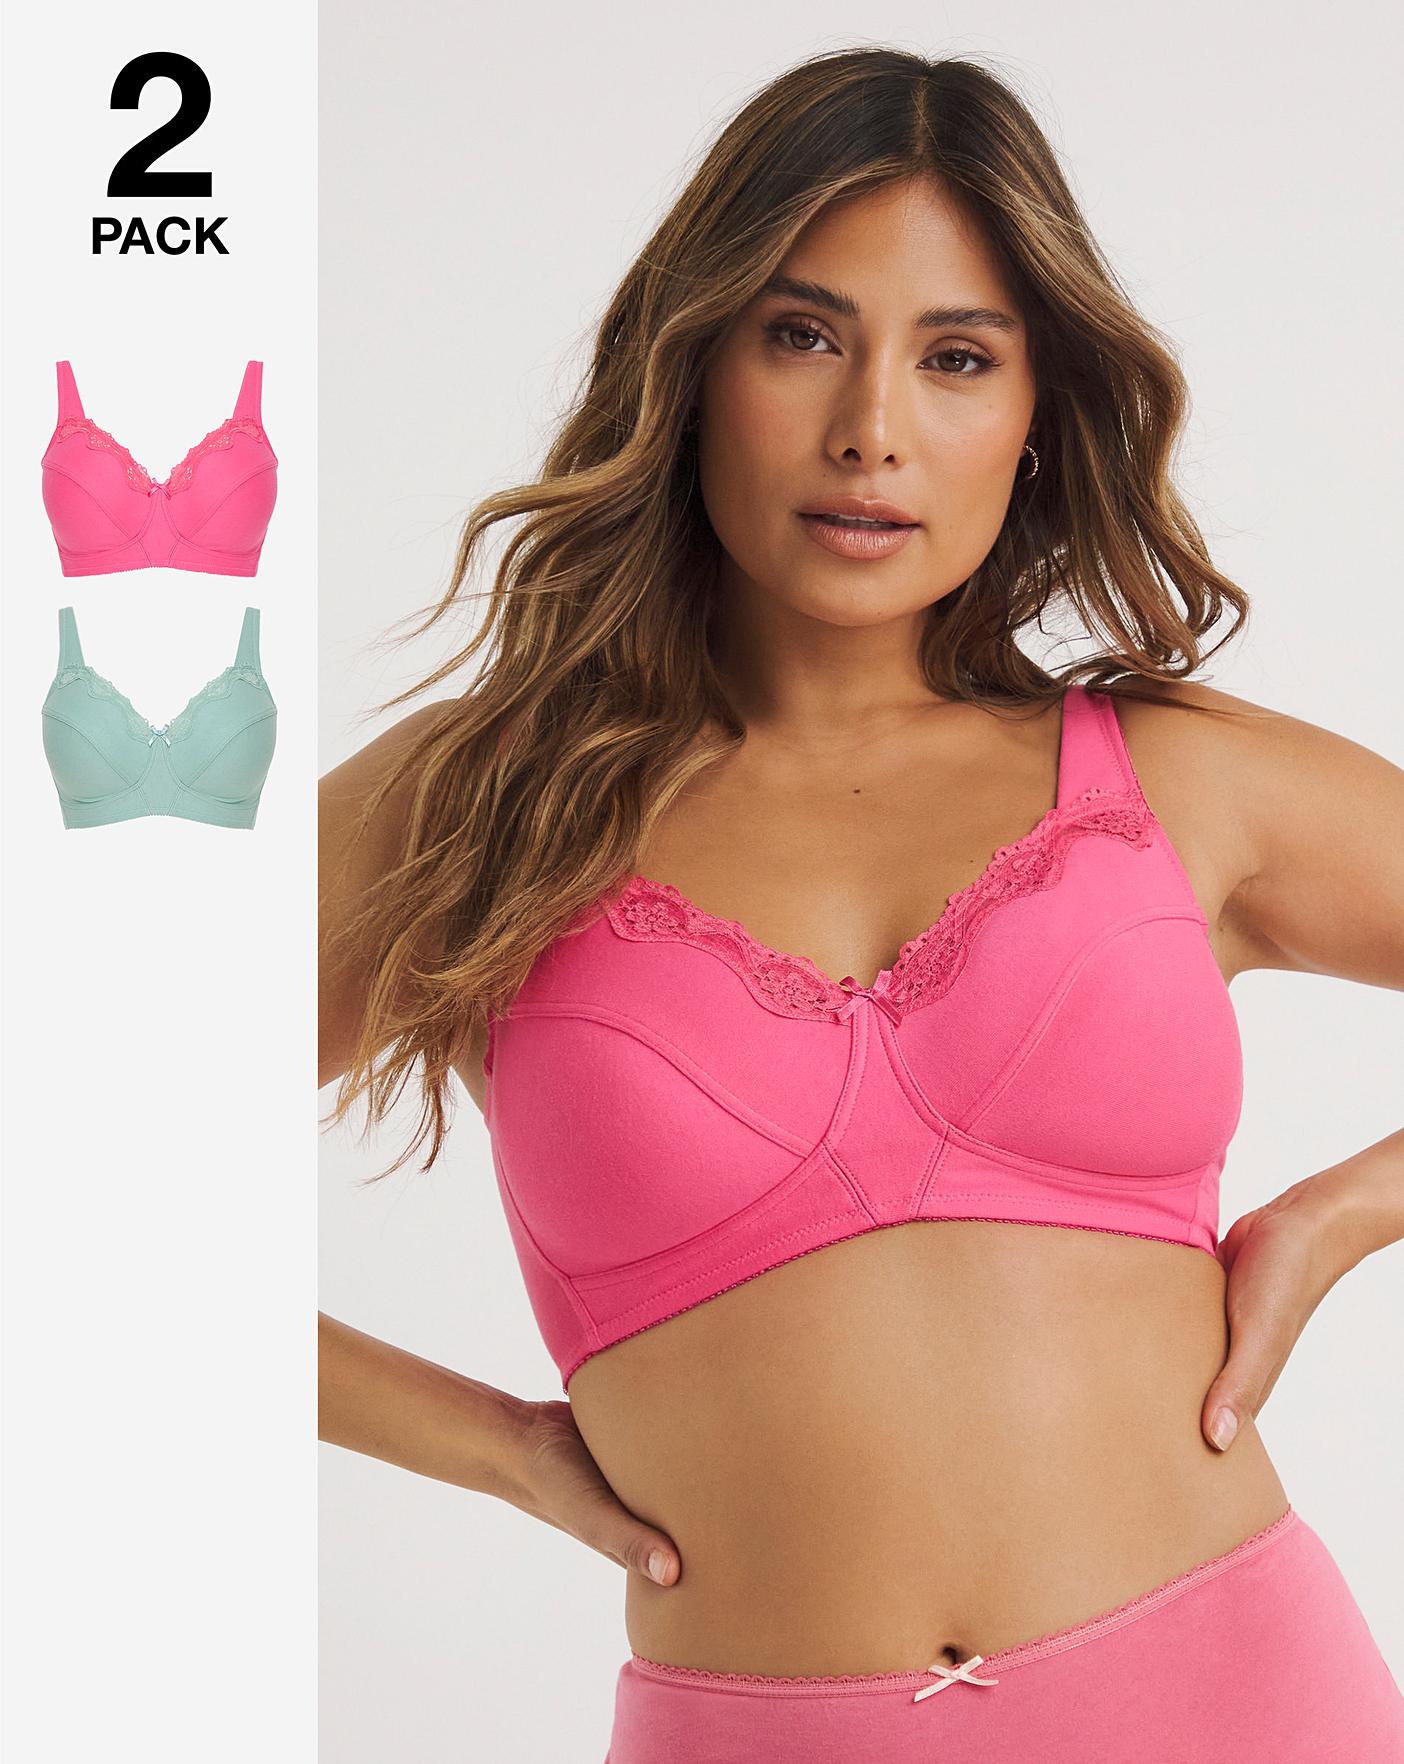 2 Pack Sarah Non Wired Bras Pink/Green